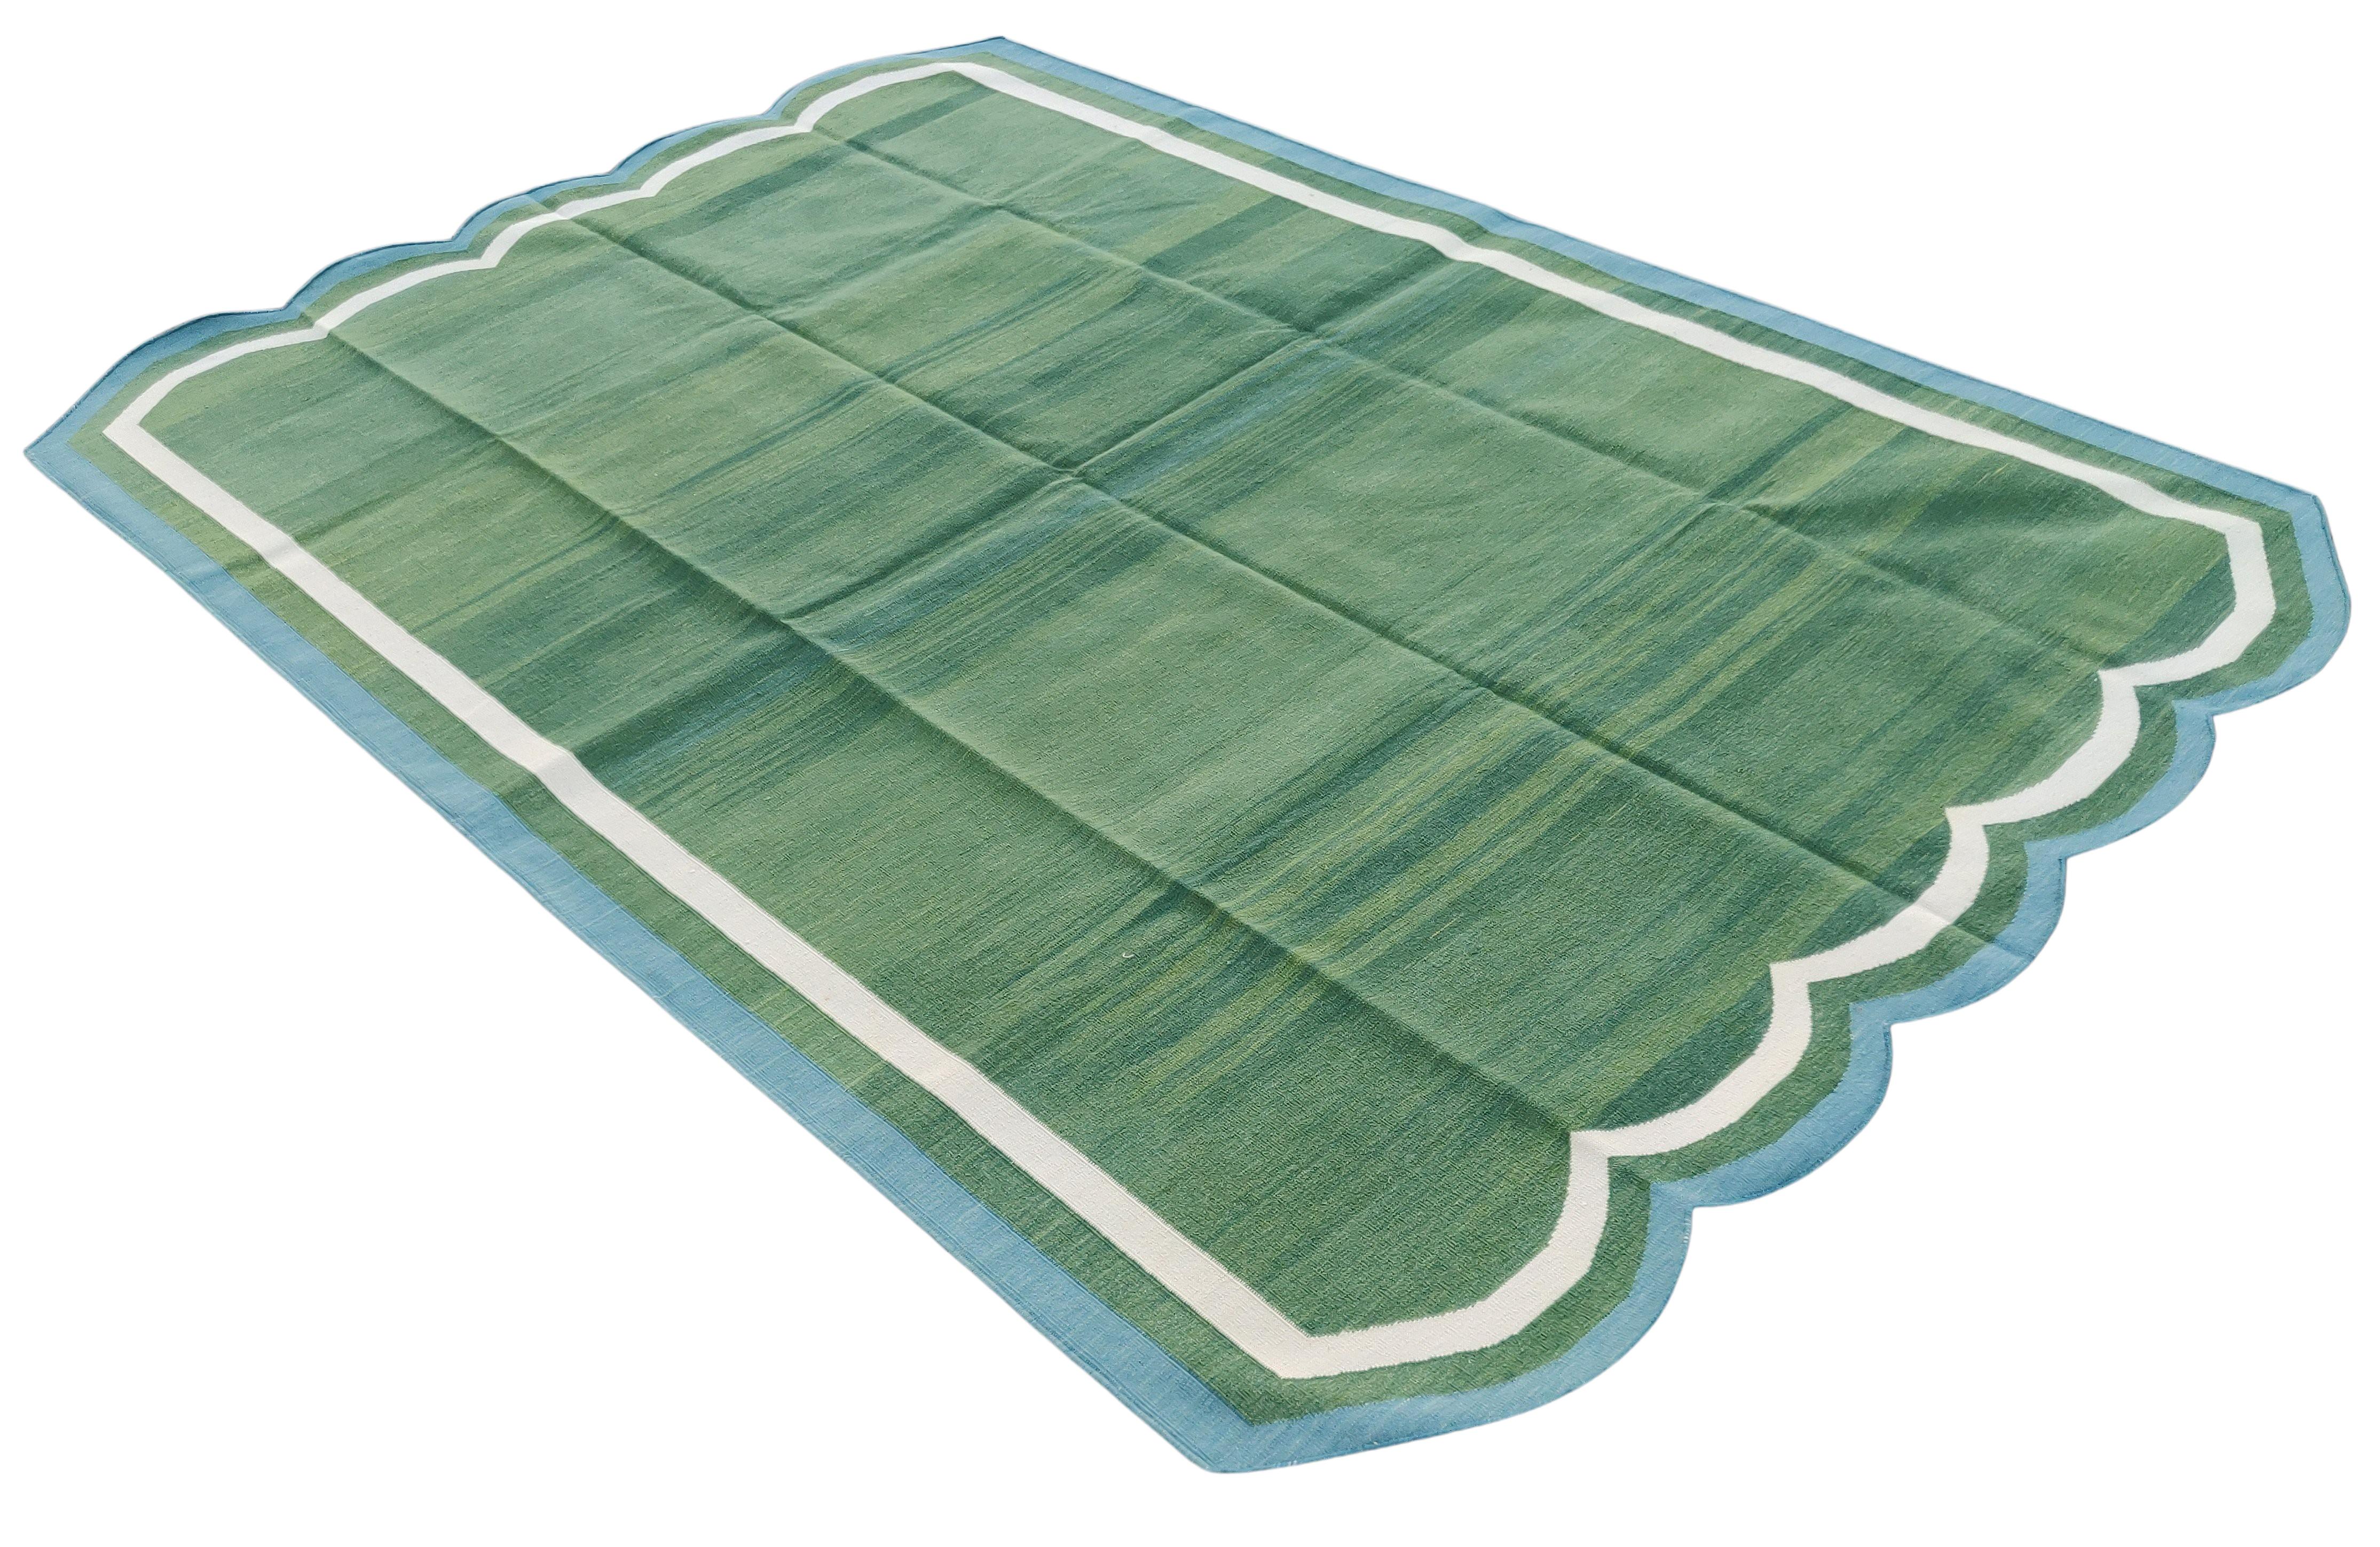 Cotton Vegetable Dyed Forest Green & Teal Blue Two Sided Scalloped Rug-5'x8' (Scallops runs on all 5' Sides)
These special flat-weave dhurries are hand-woven with 15 ply 100% cotton yarn. Due to the special manufacturing techniques used to create